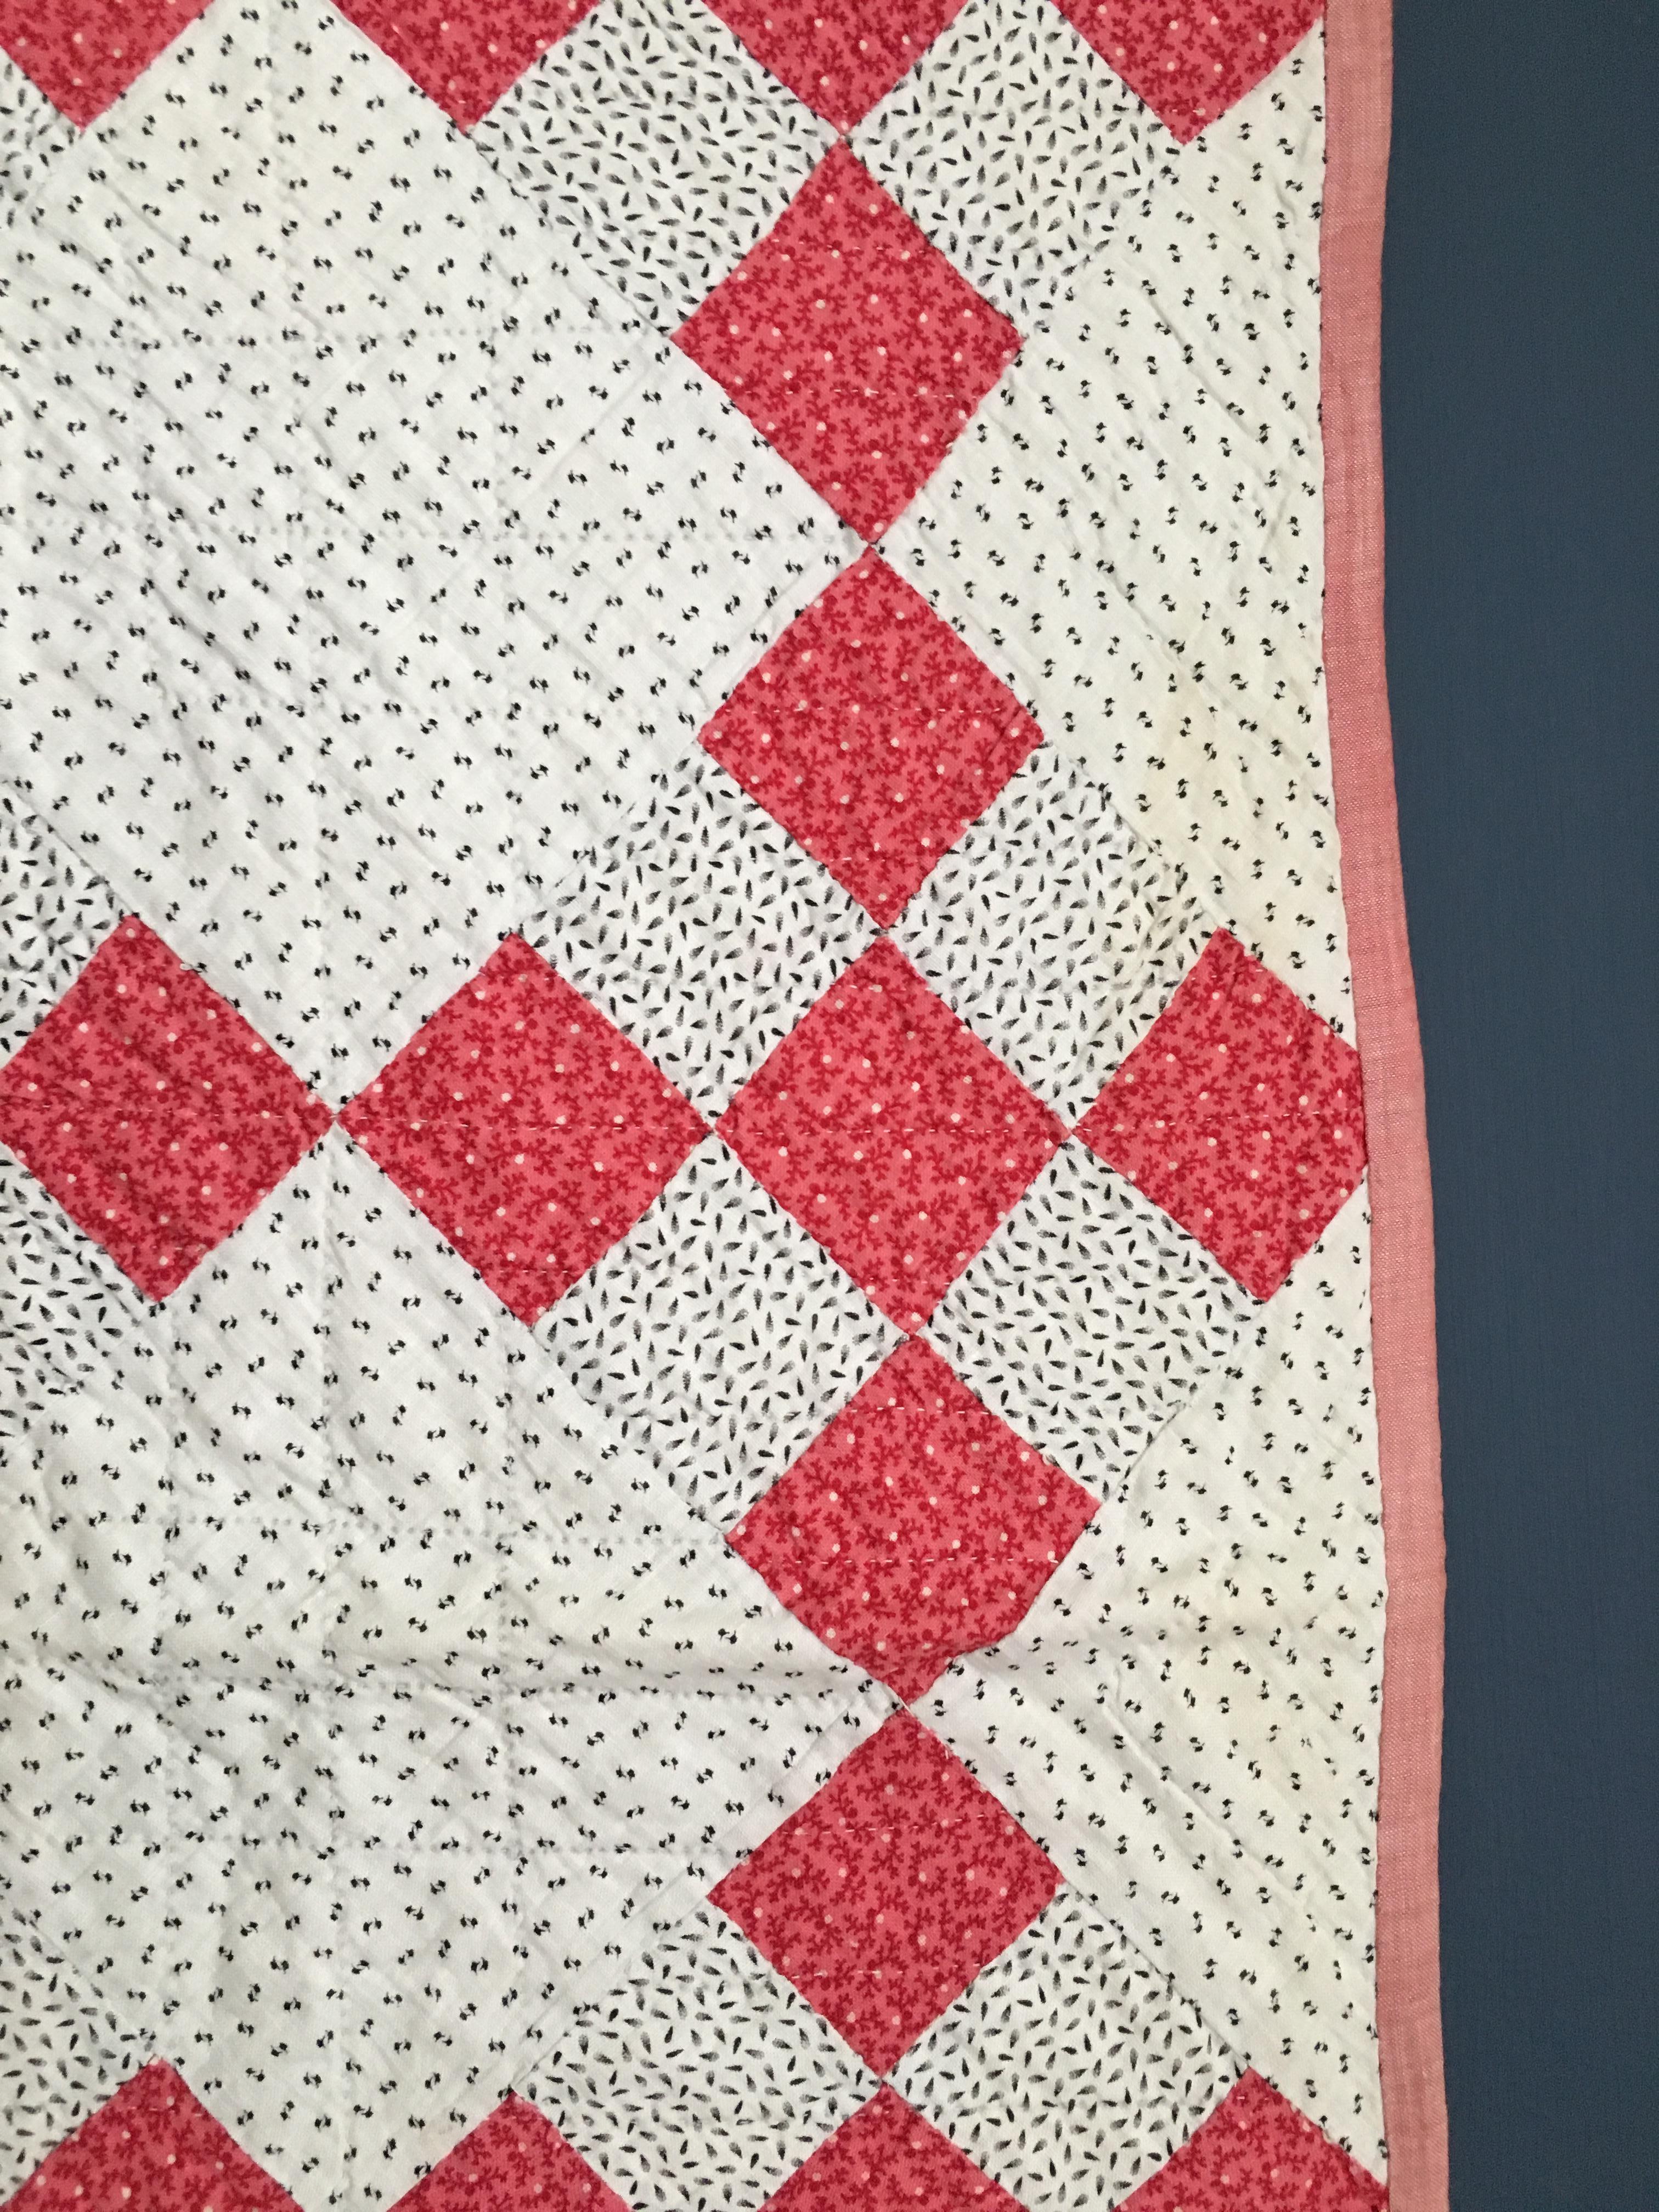 Quilted Vintage Patchwork Quilt